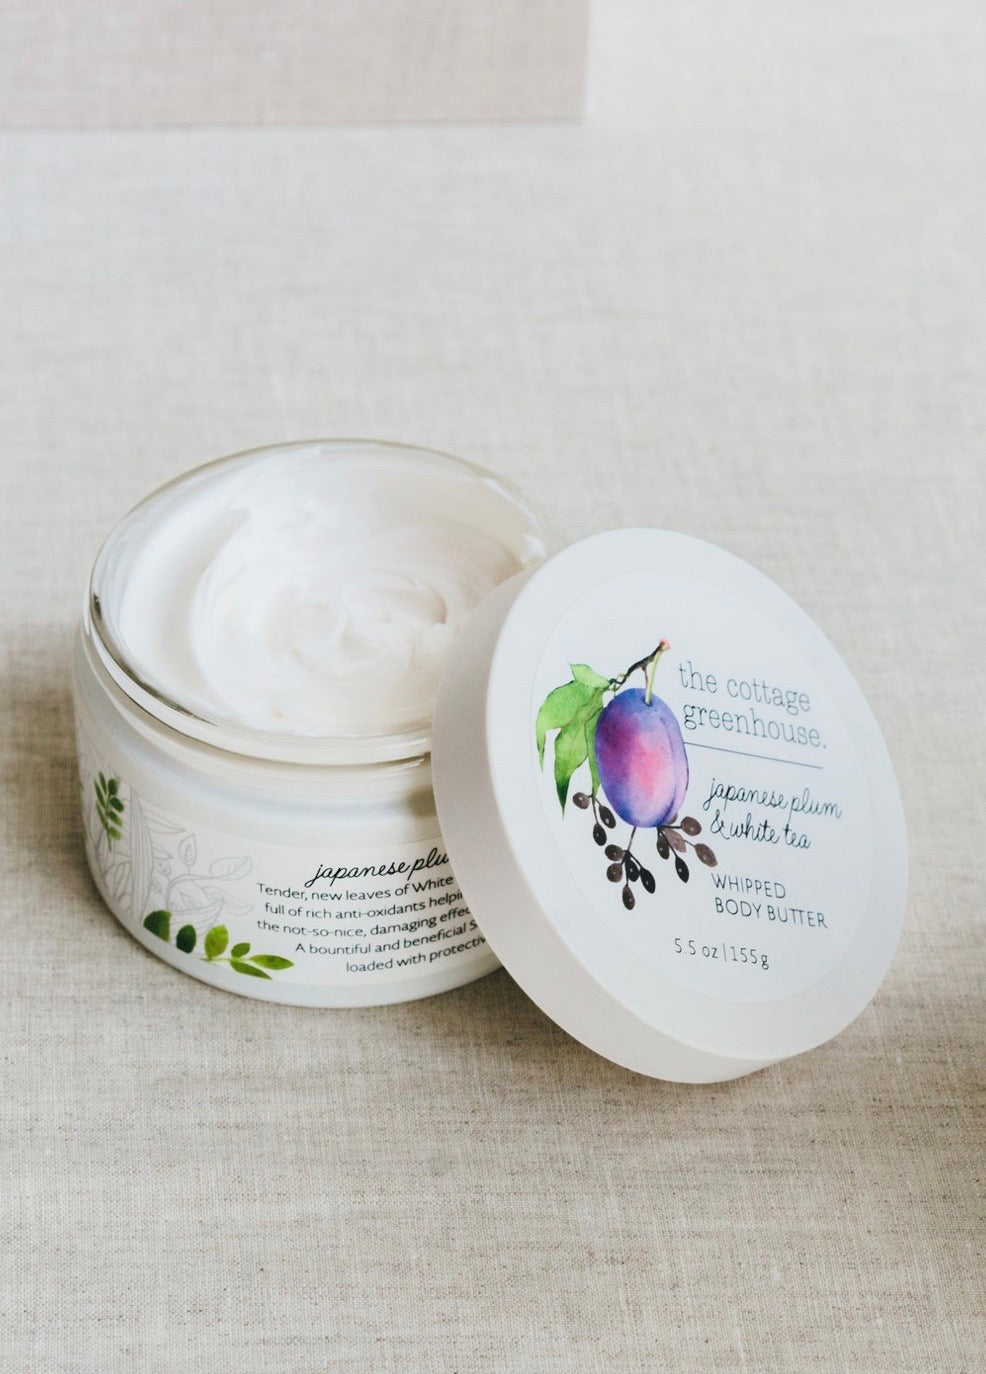 Whipped Body Butter-Cottage Greenhouse